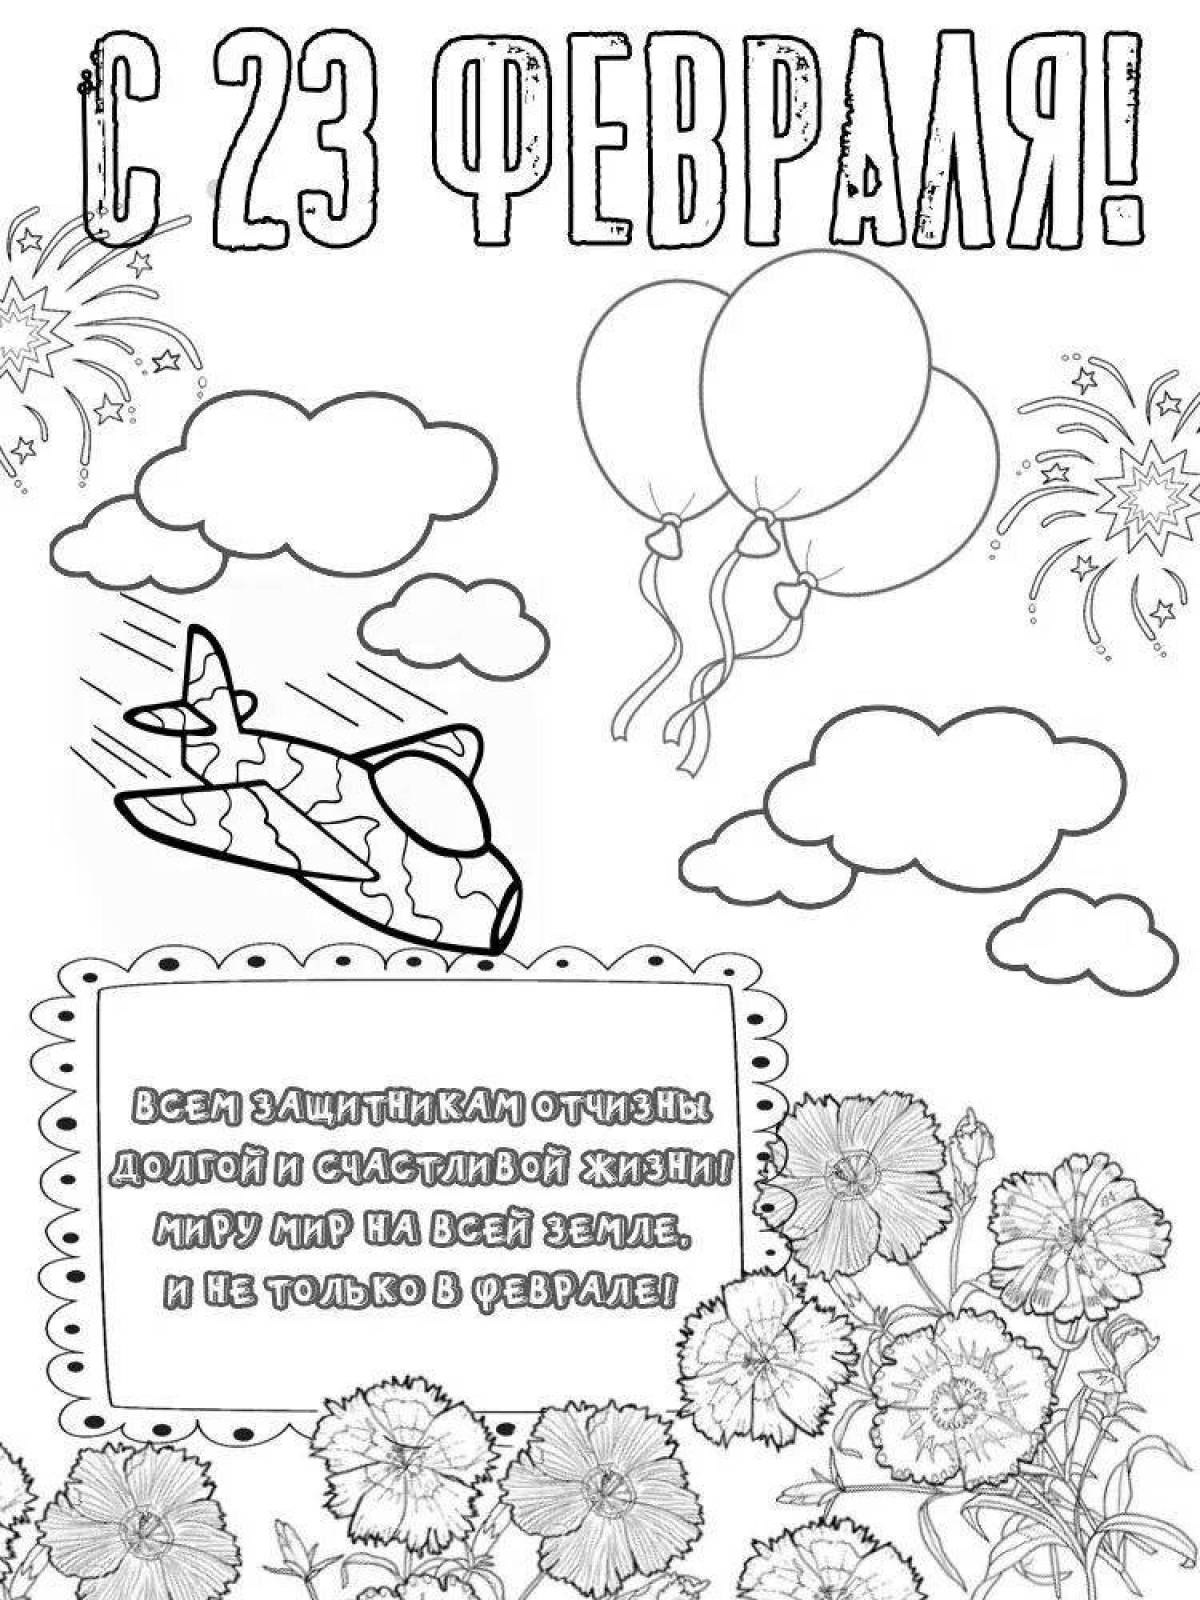 Serene February 23 lettering coloring page